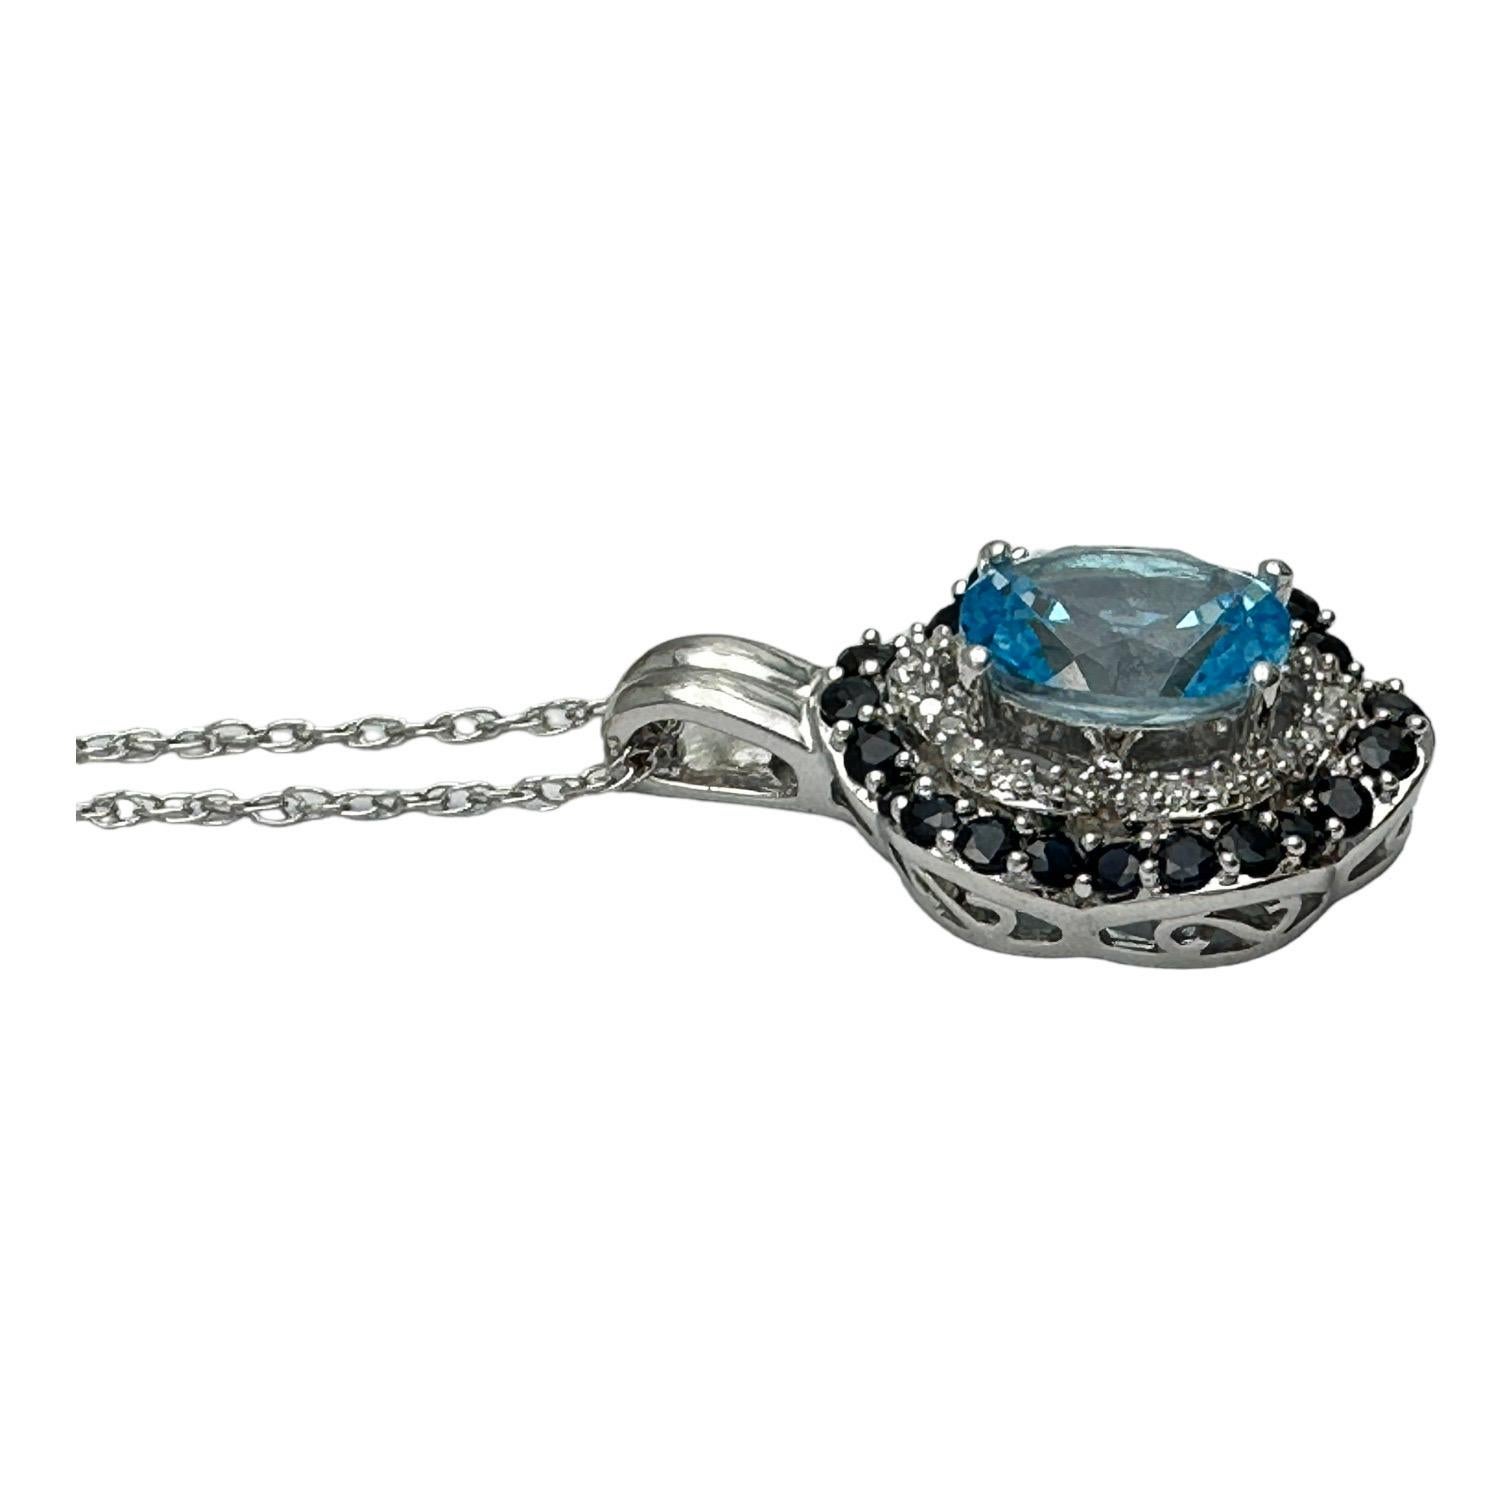 14 karat white gold pendant features an oval-shaped Swiss blue topaz gemstone surrounded by a row of genuine diamonds and an outer row of blue sapphires. The combined gemstone weight of this pendant is 2.00 carats.

Measures 15mm or 3/4 inches plus